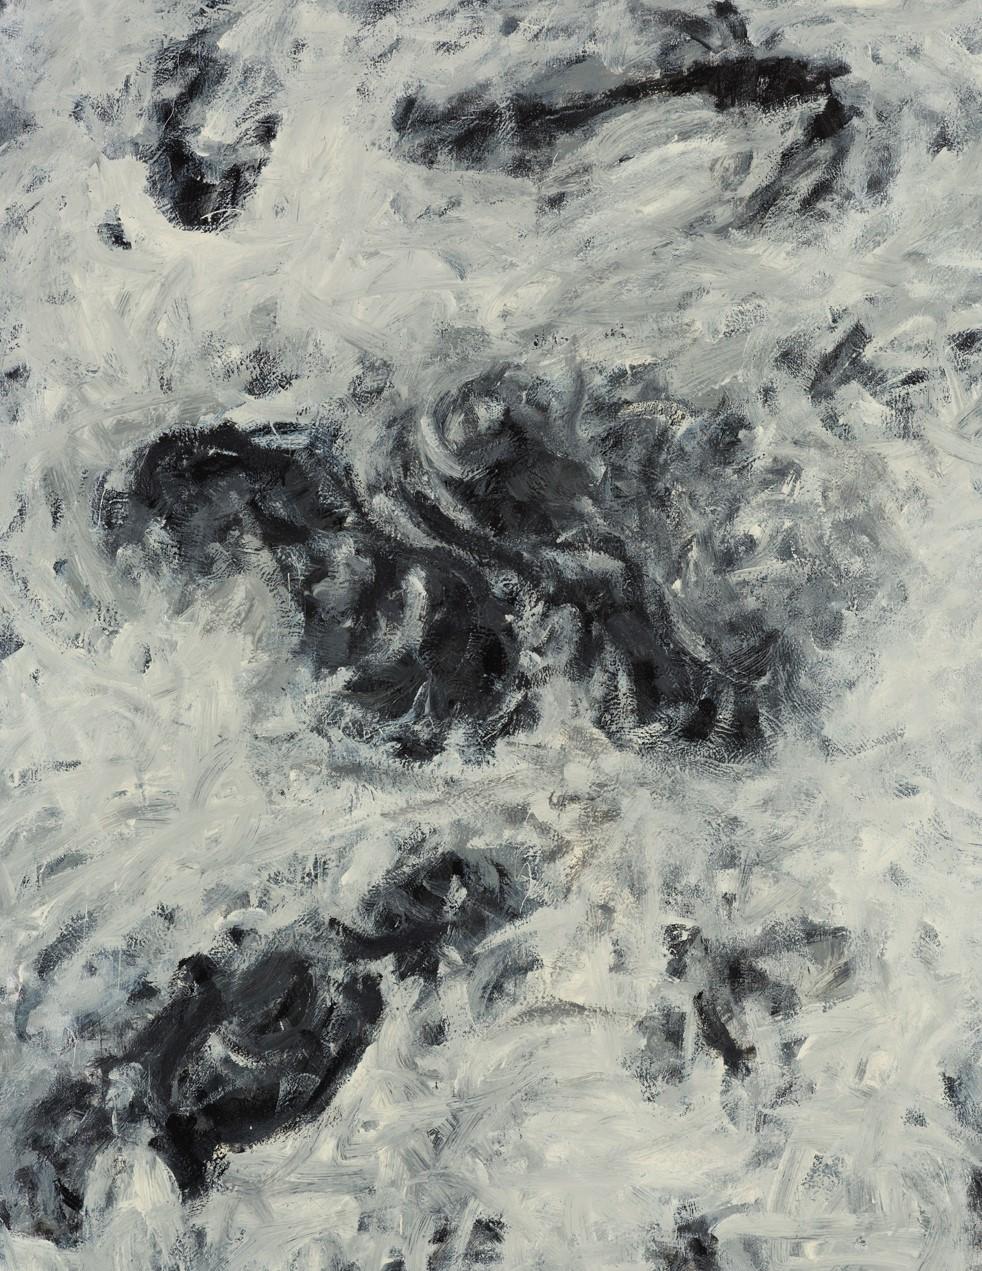 Untitled 010 [Remains of the Remains 010] - Contemporary, Abstract, Grey4 - Painting by Zsolt Berszán